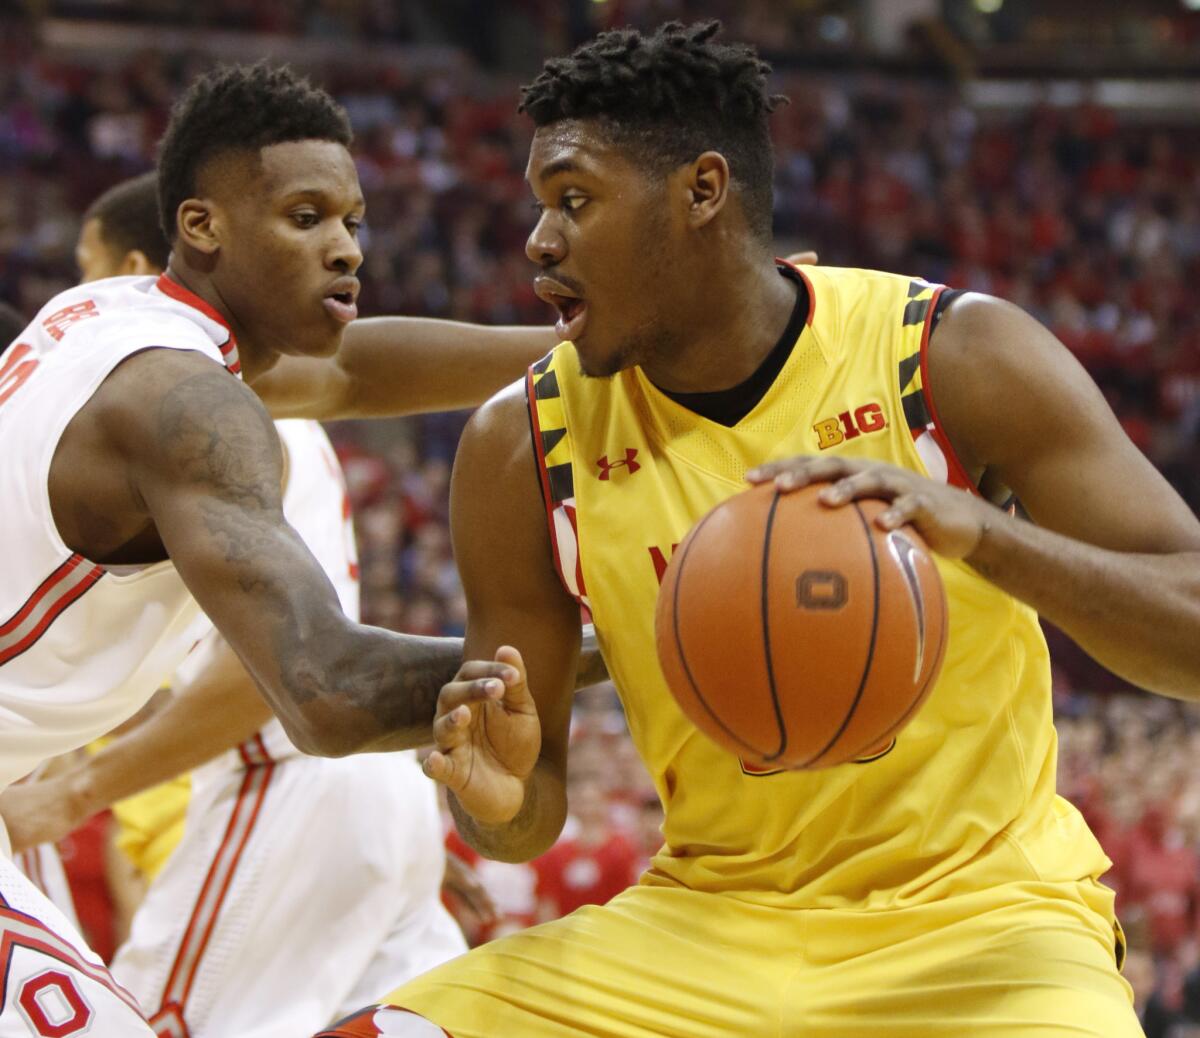 Maryland forward Diamond Stone, right, works against Ohio State's David Bell during a 66-61 victory by the Terrapins.